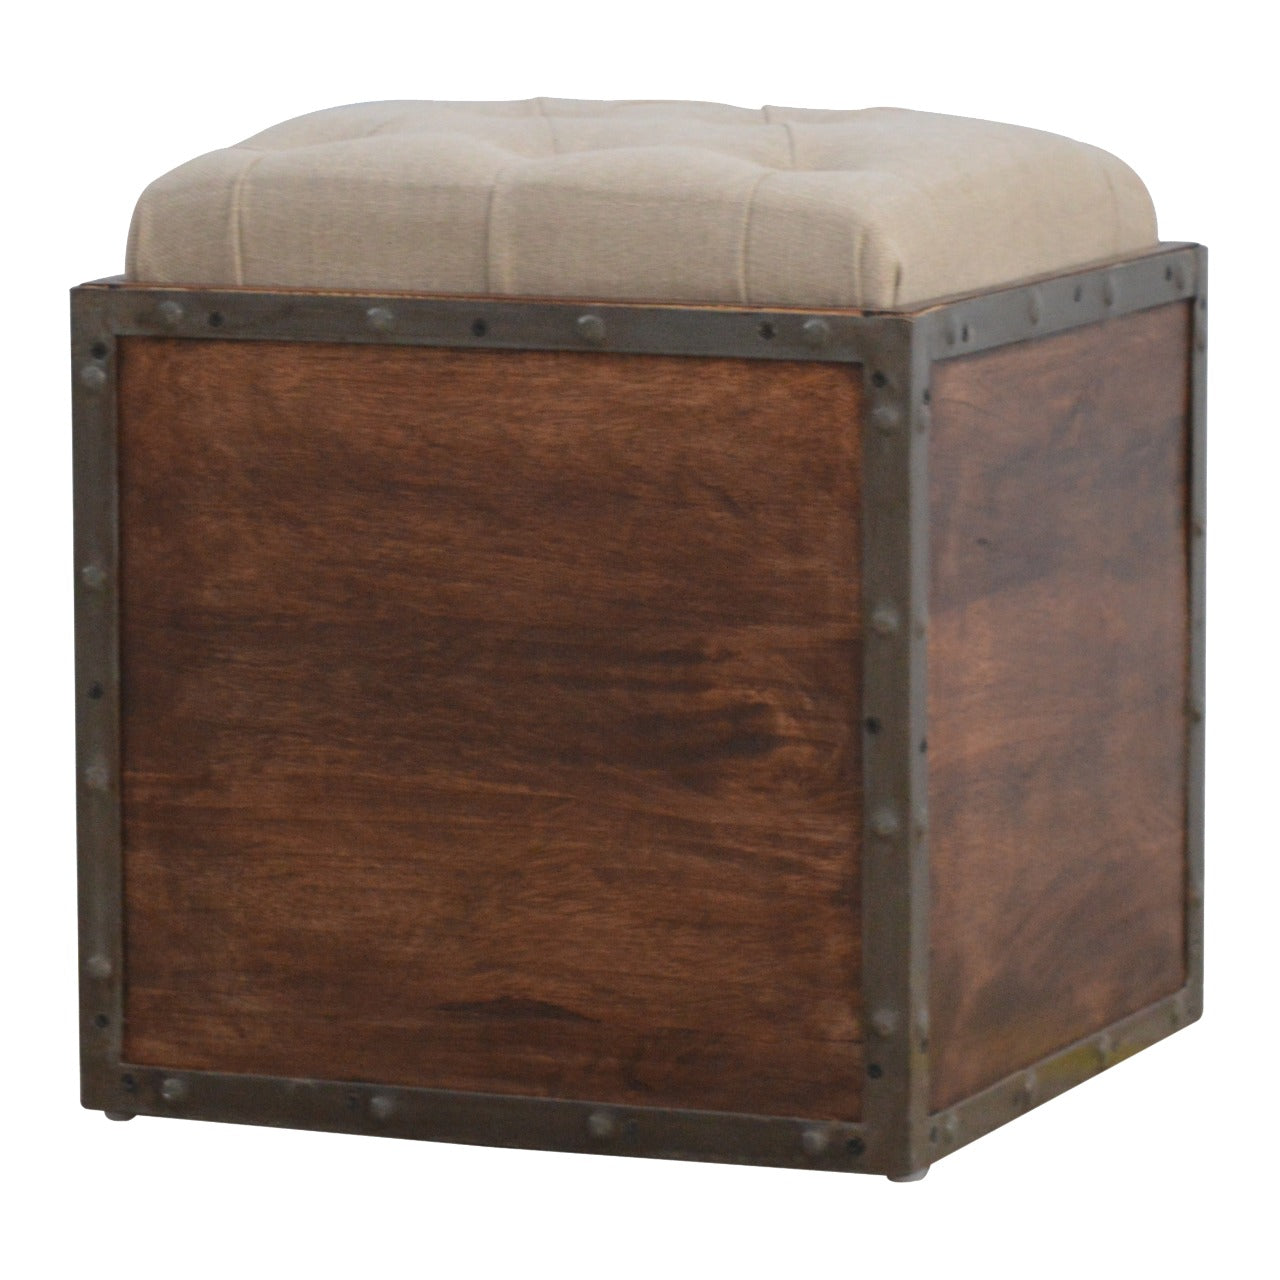 View Iron Padded Storage Footstool information